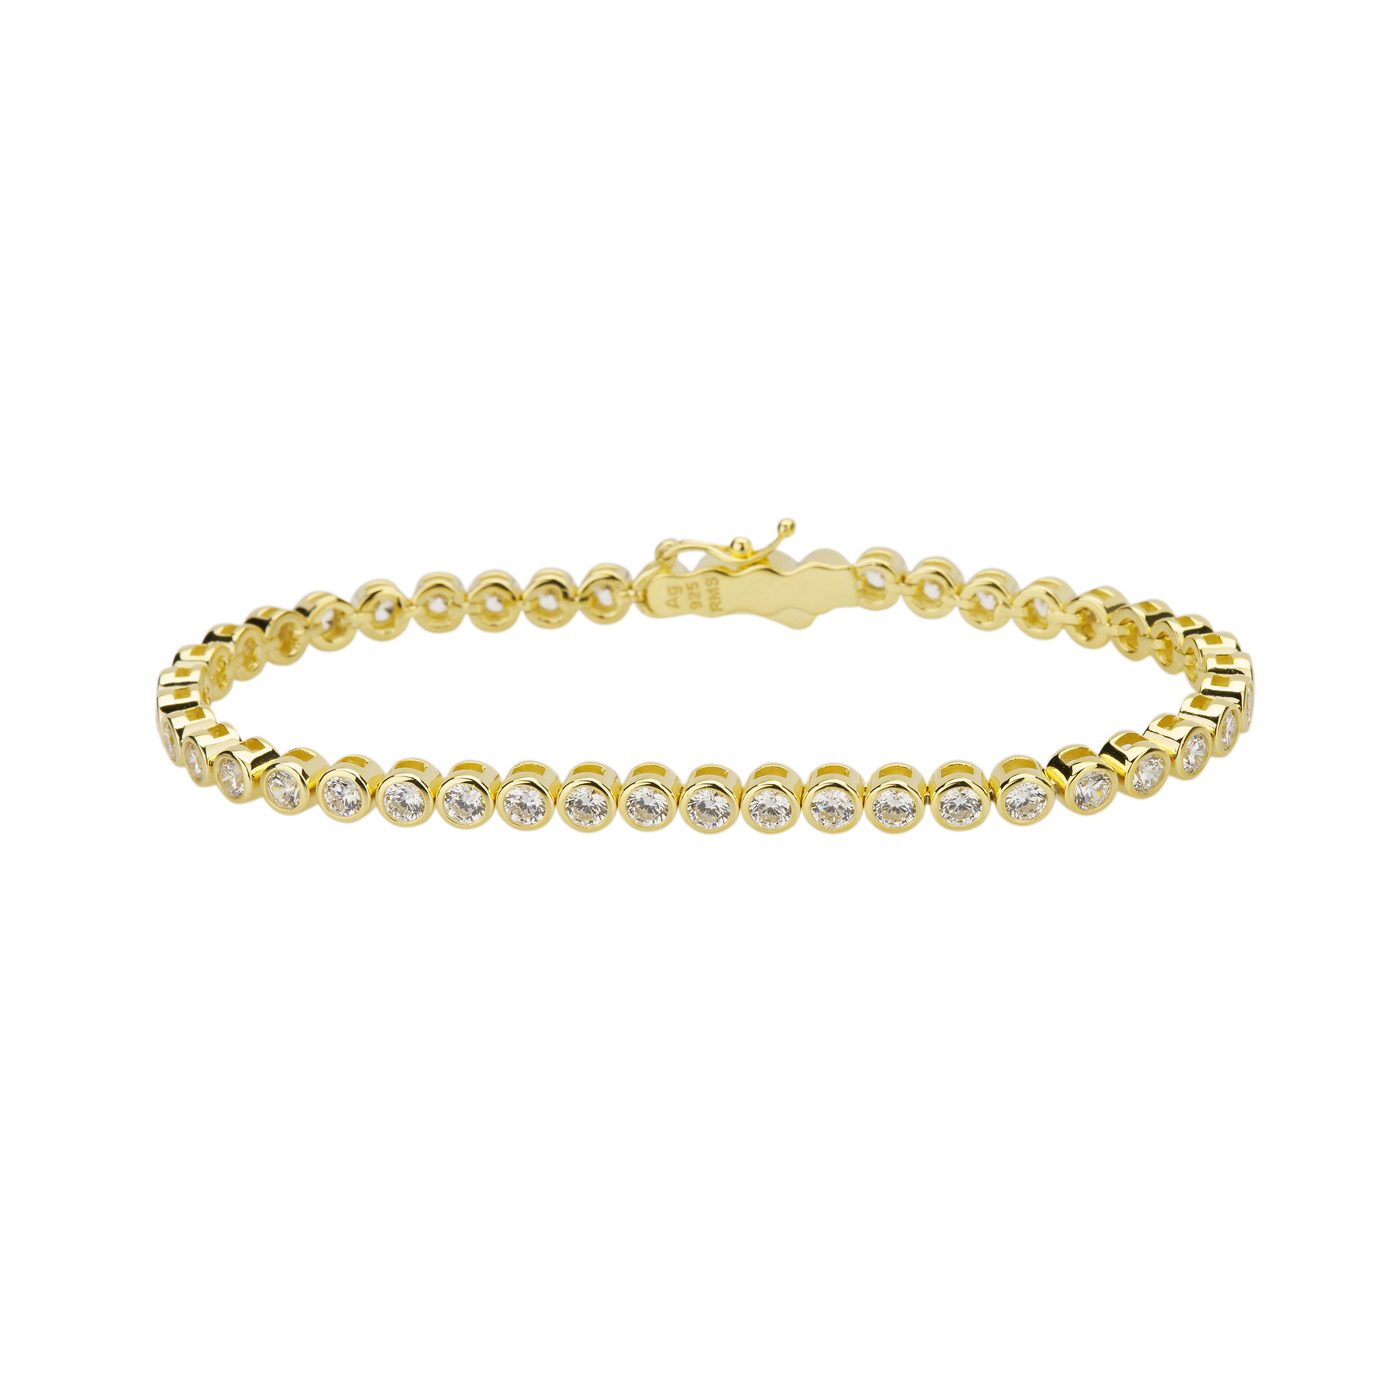 Bracelet, 925Ag Gold-Plated, Length 19 cm, with Zirconia - 1 piece